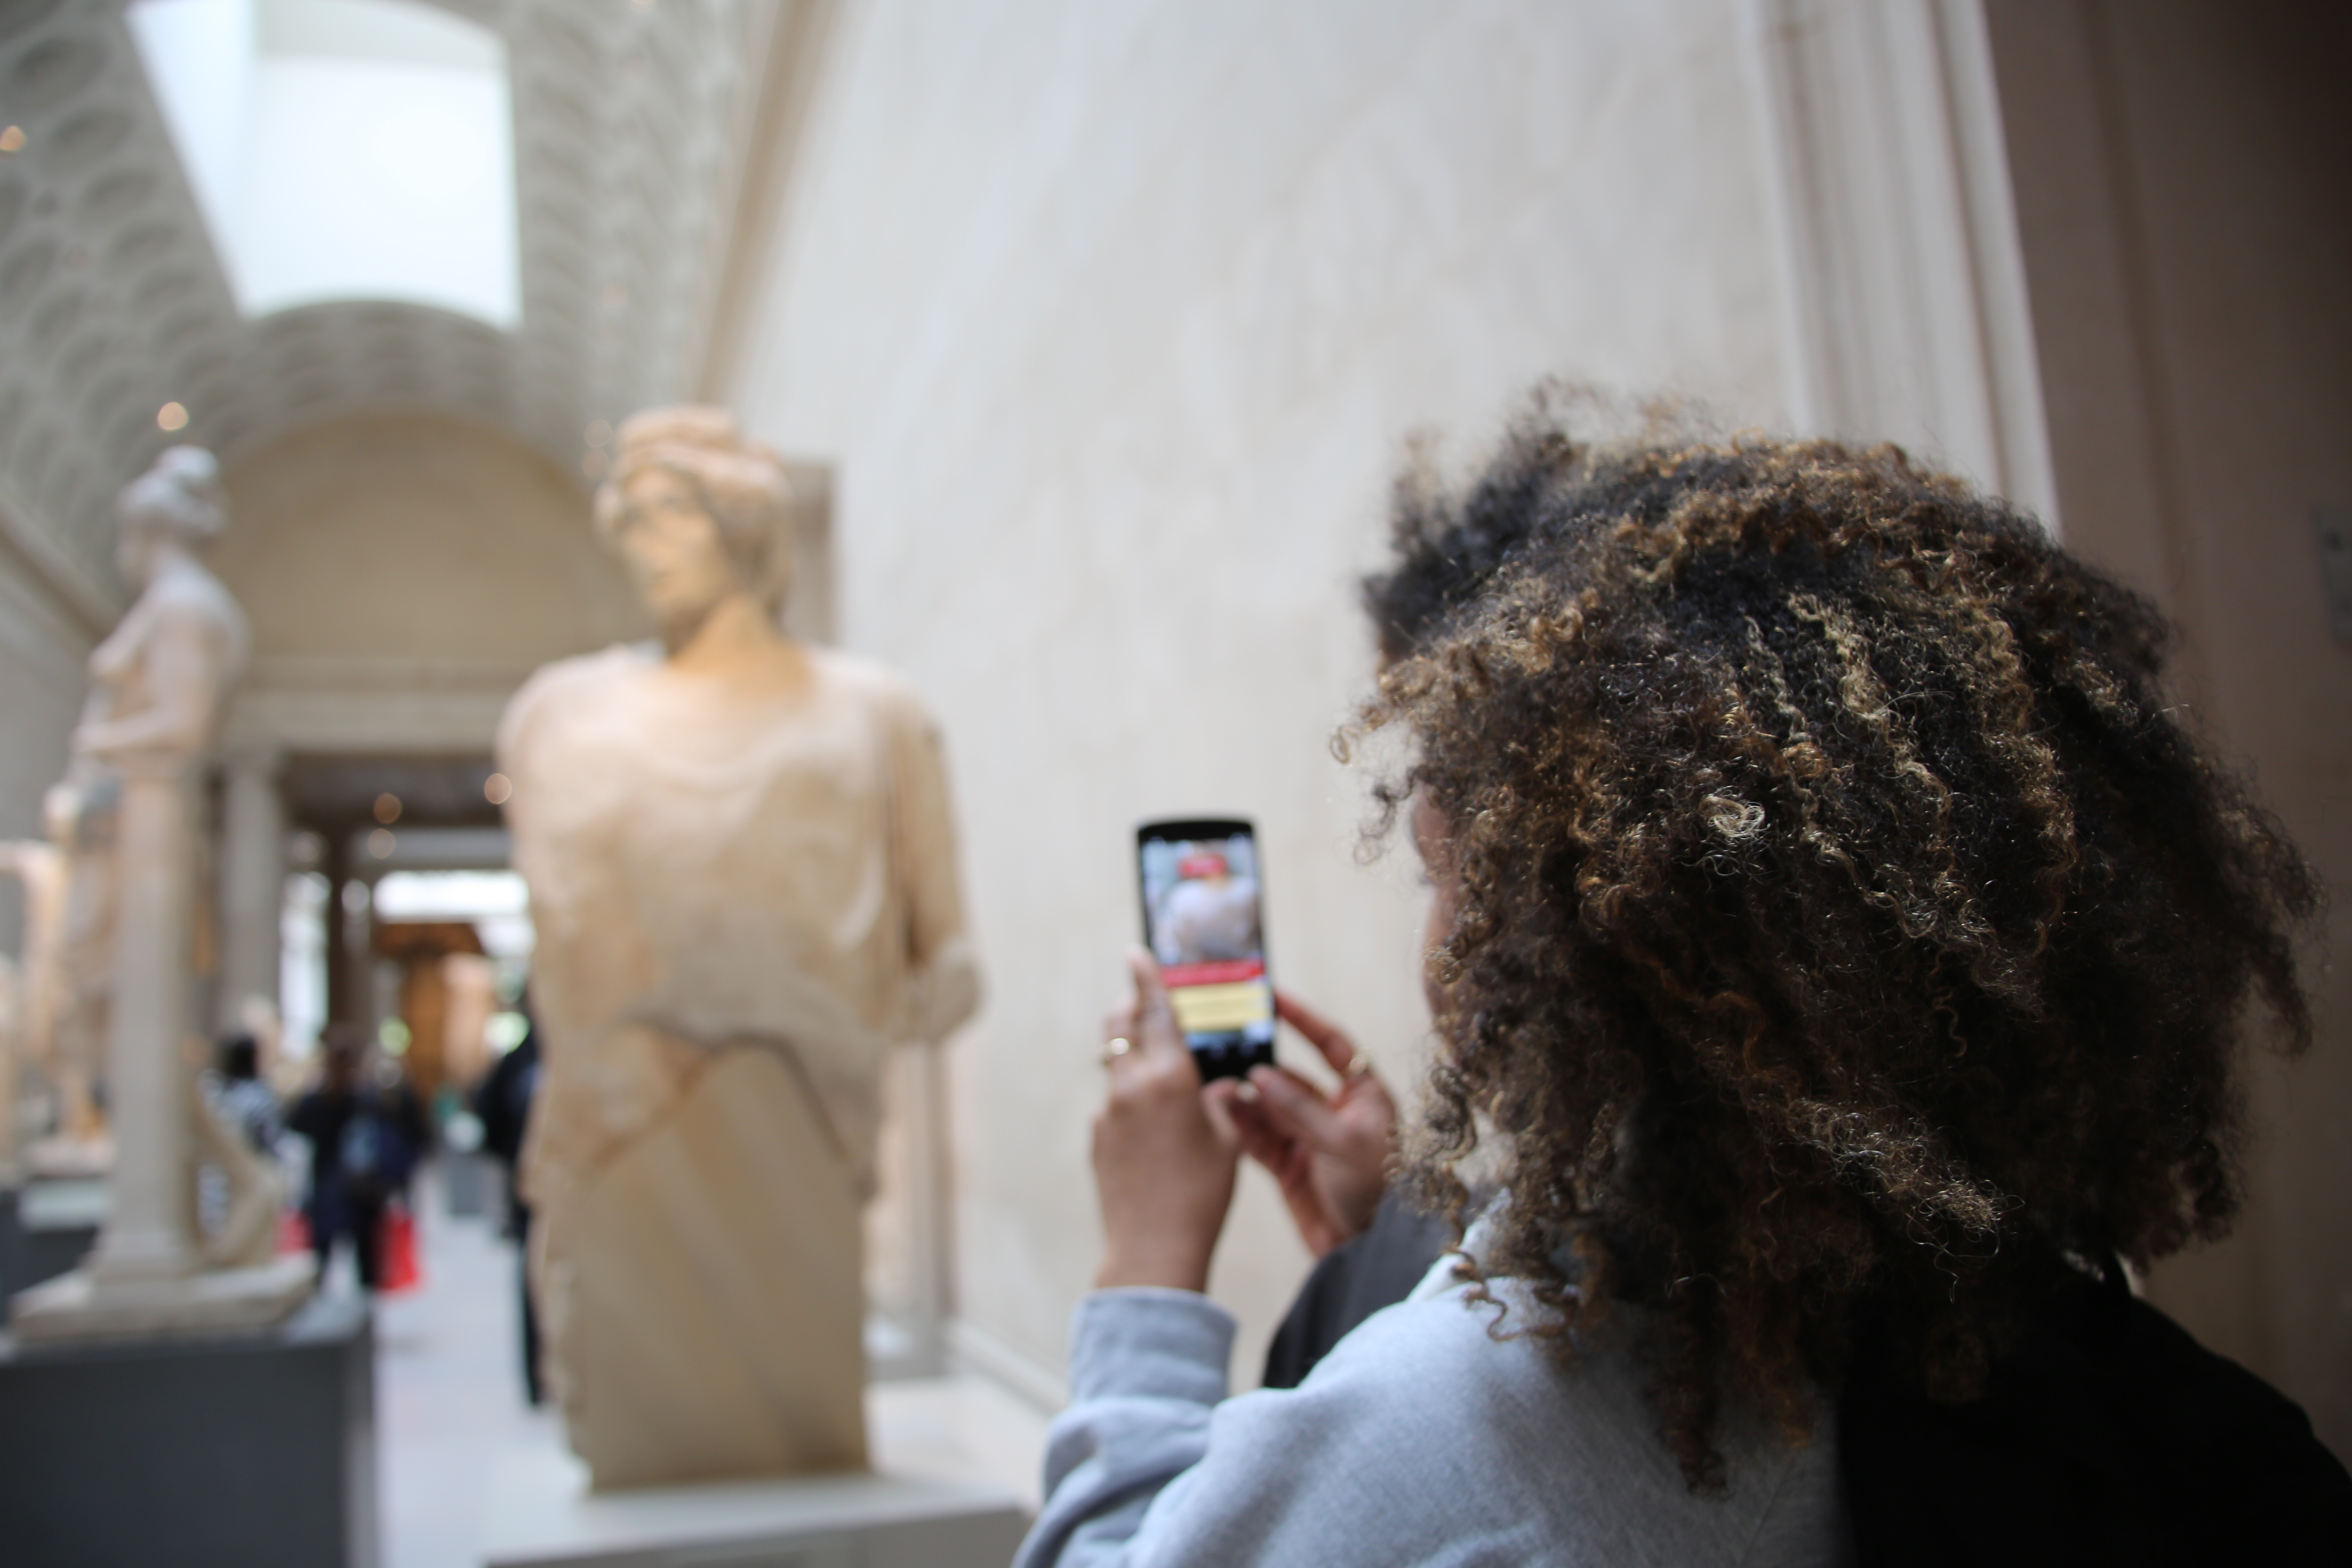 A mobile augmented reality game based in the Metropolitan Museum of Art